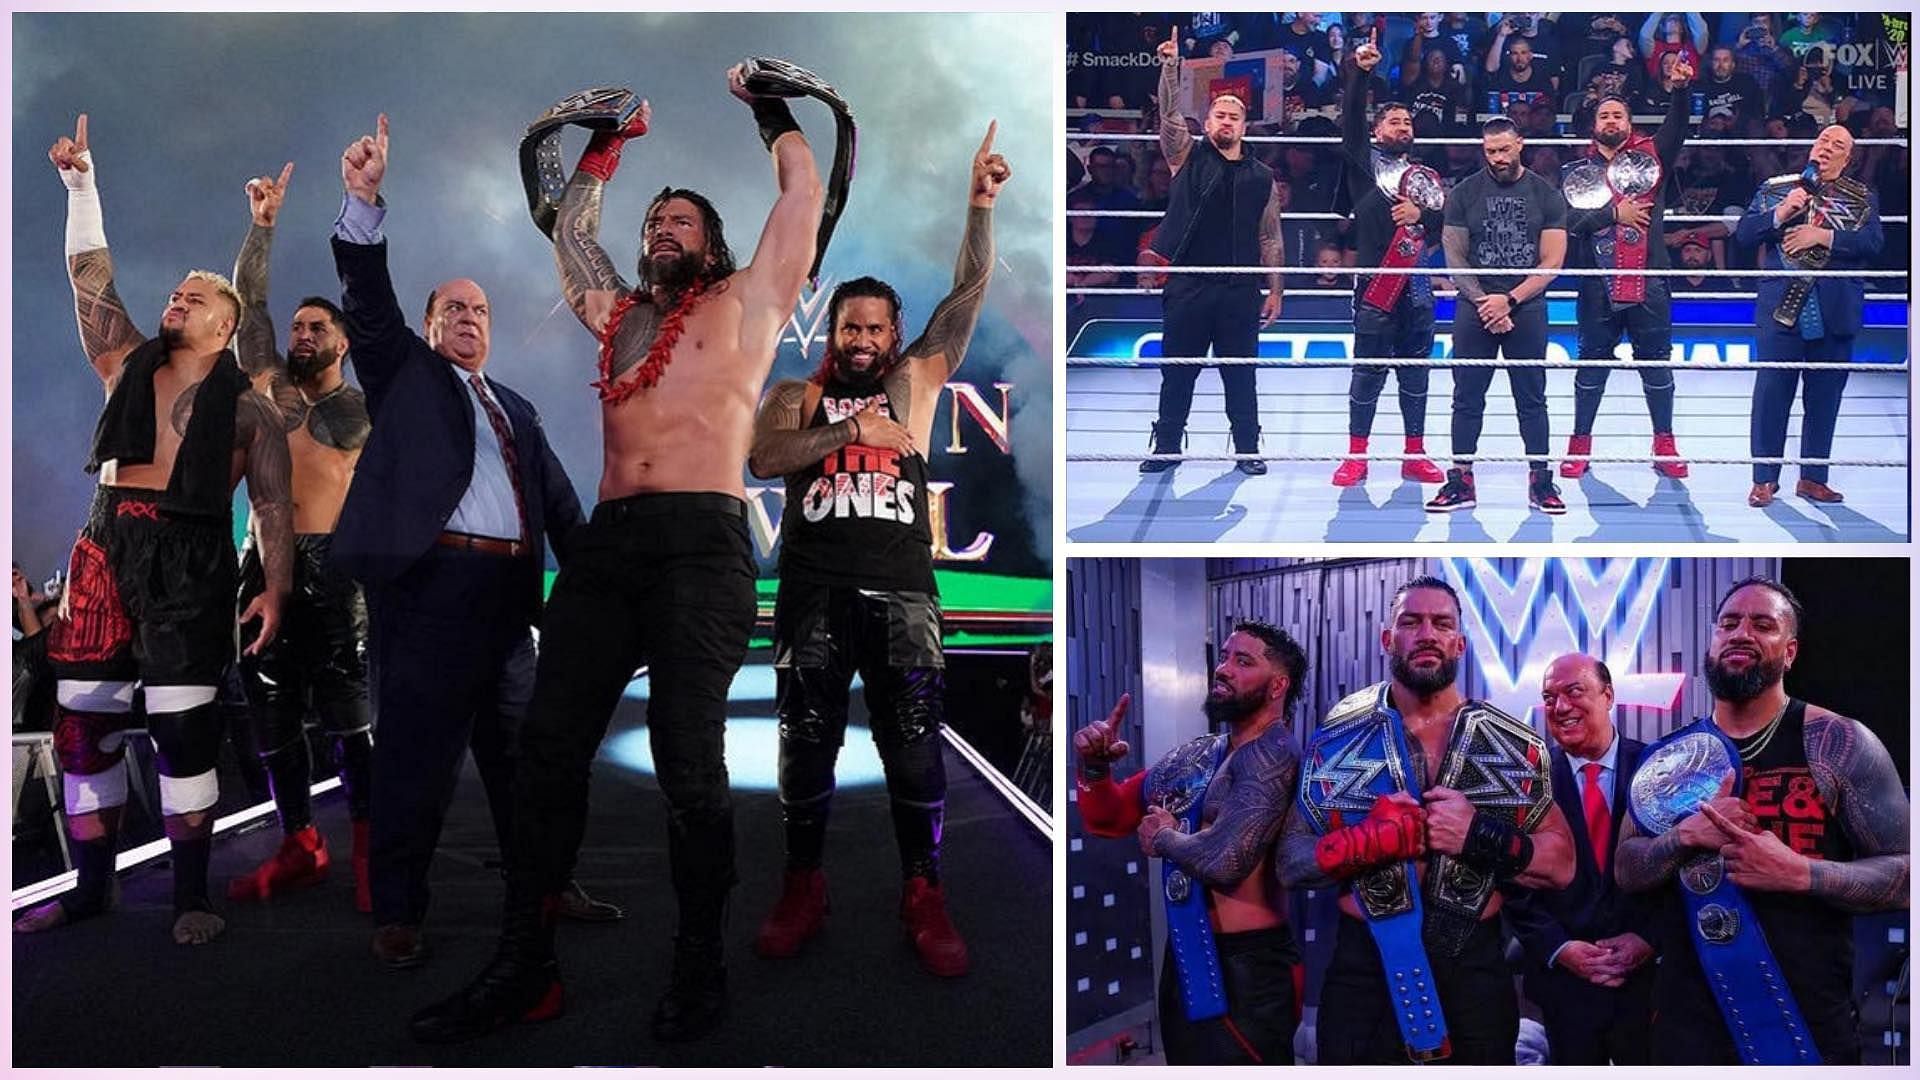 Roman Reigns and The Bloodline have been the most dominant WWE faction